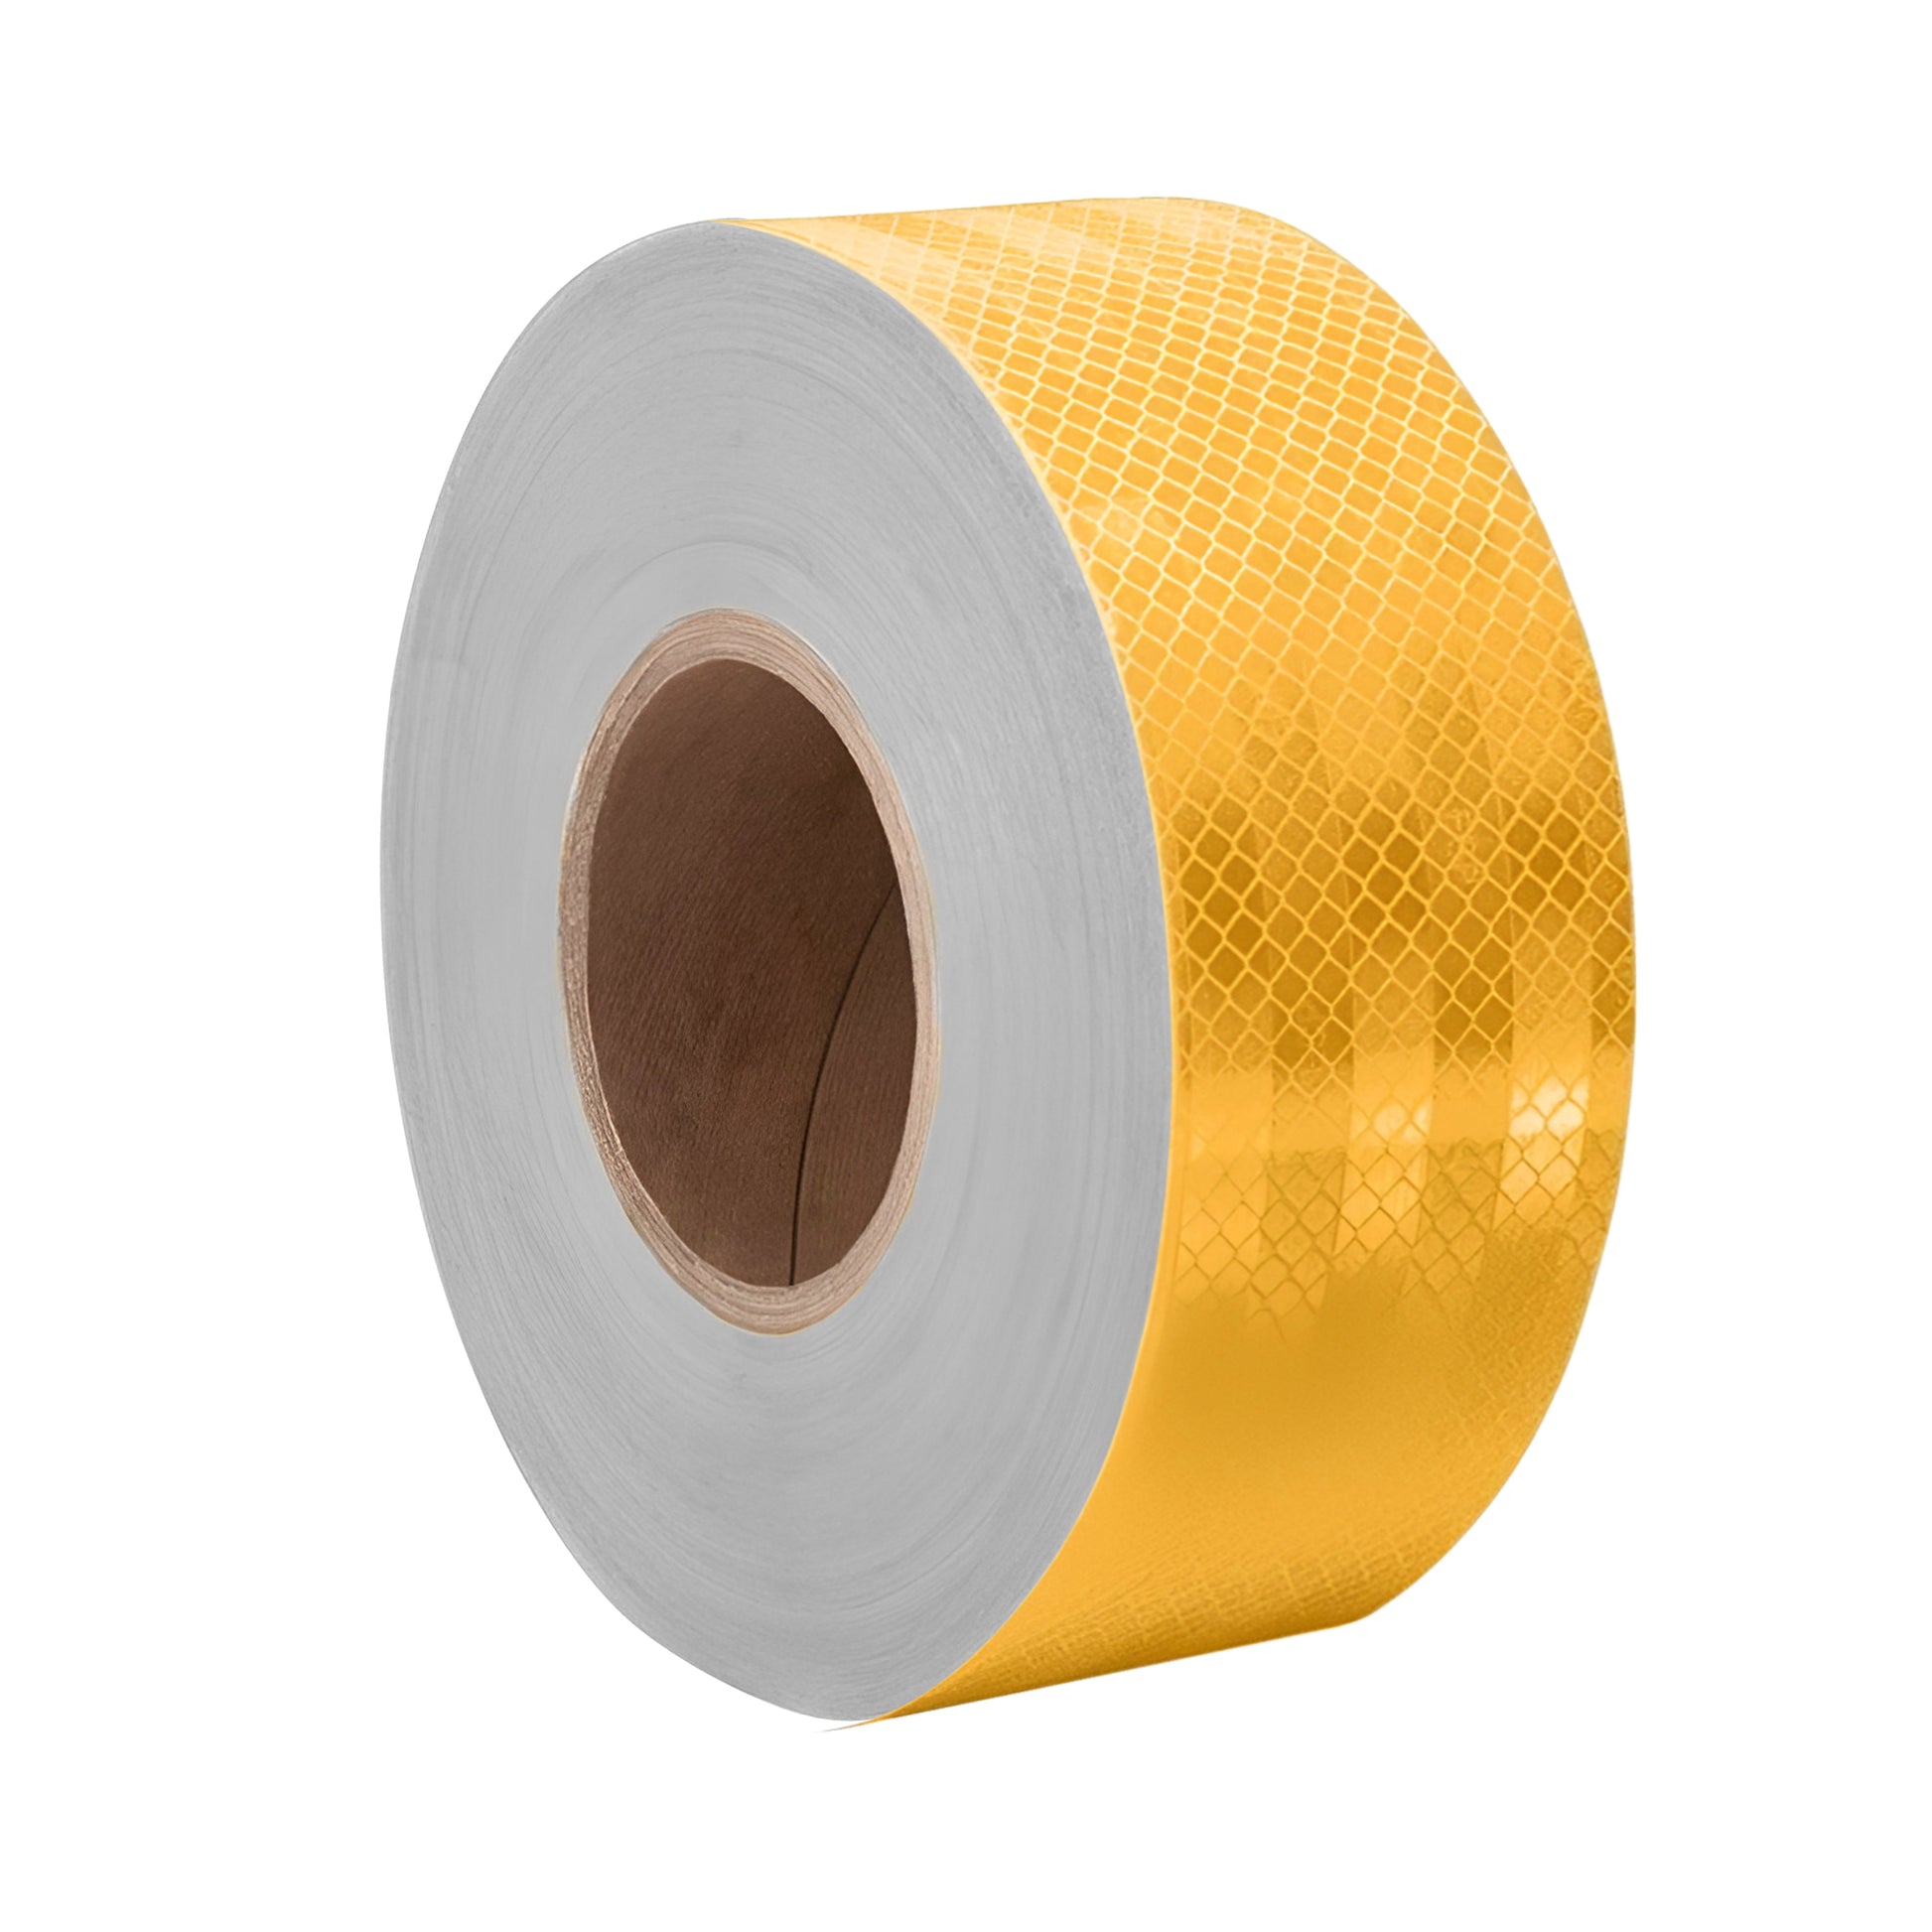 Waterproof Reflective Safety Tape Floor Marking Self-Adhesive Roll~5191